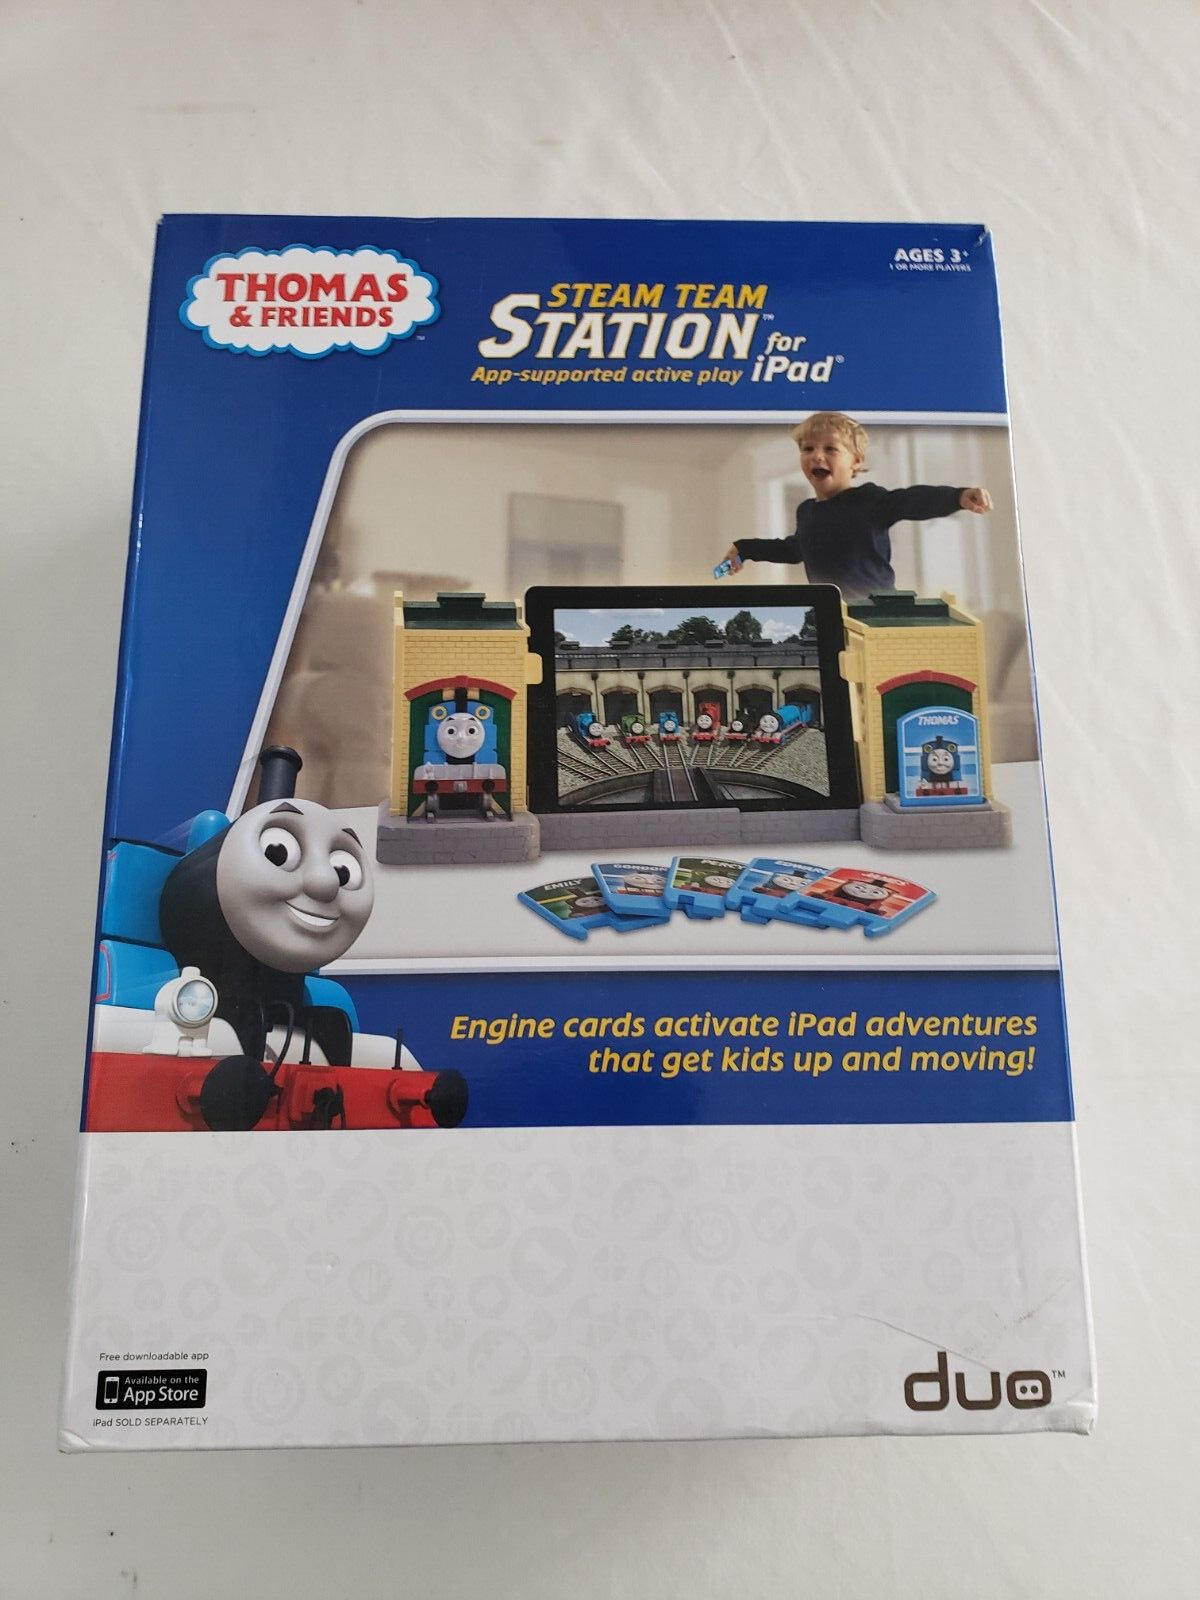 ***BRAND NEW*** Thomas The Train/friends Steam Team Station For ipad